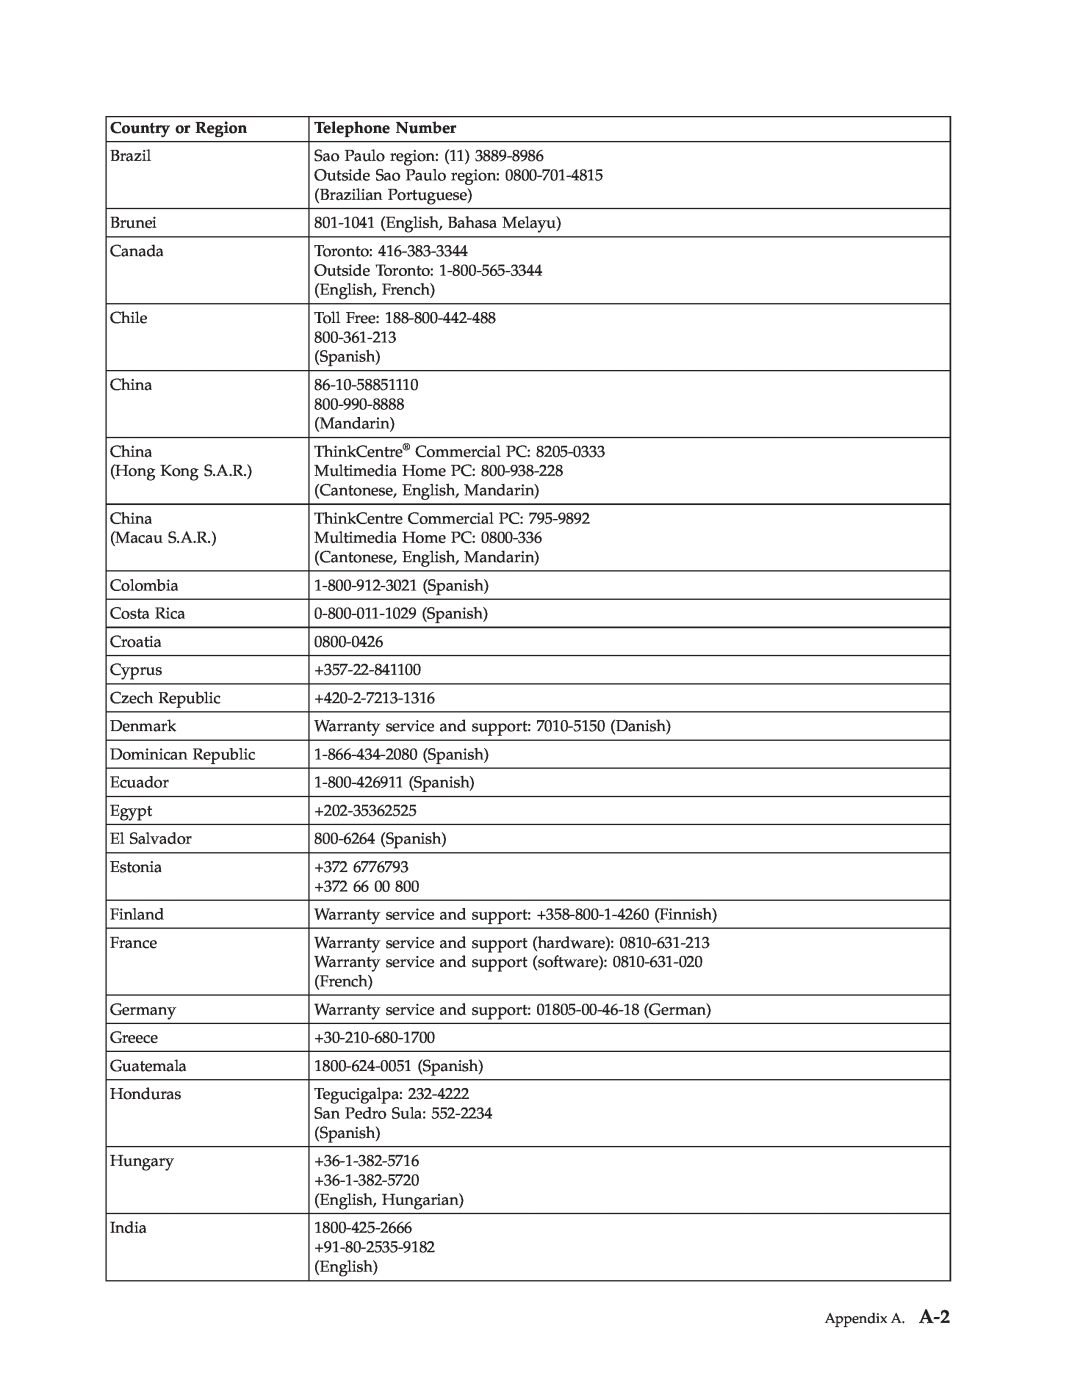 Lenovo D186 manual Country or Region, Telephone Number, Appendix A. A-23 